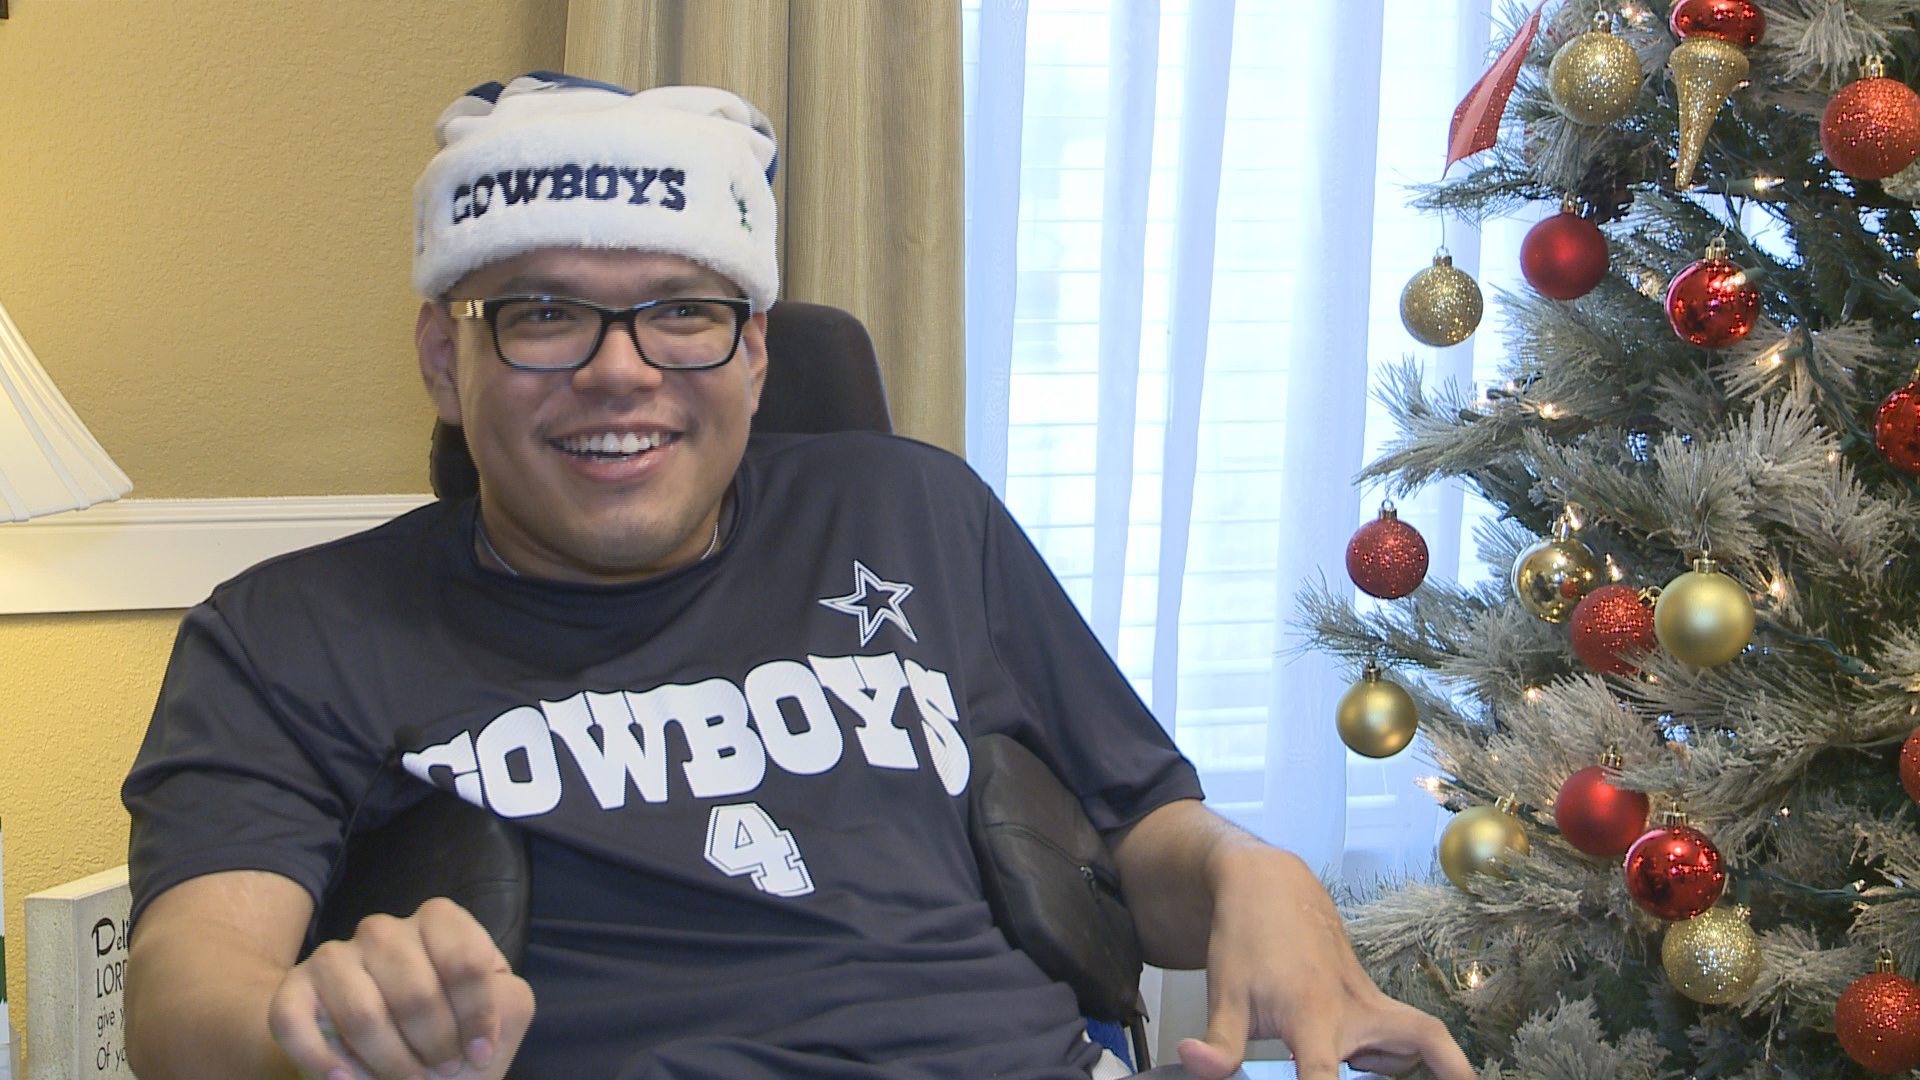 Cowboys fan living with Cerebral Palsy surprised with Christmas